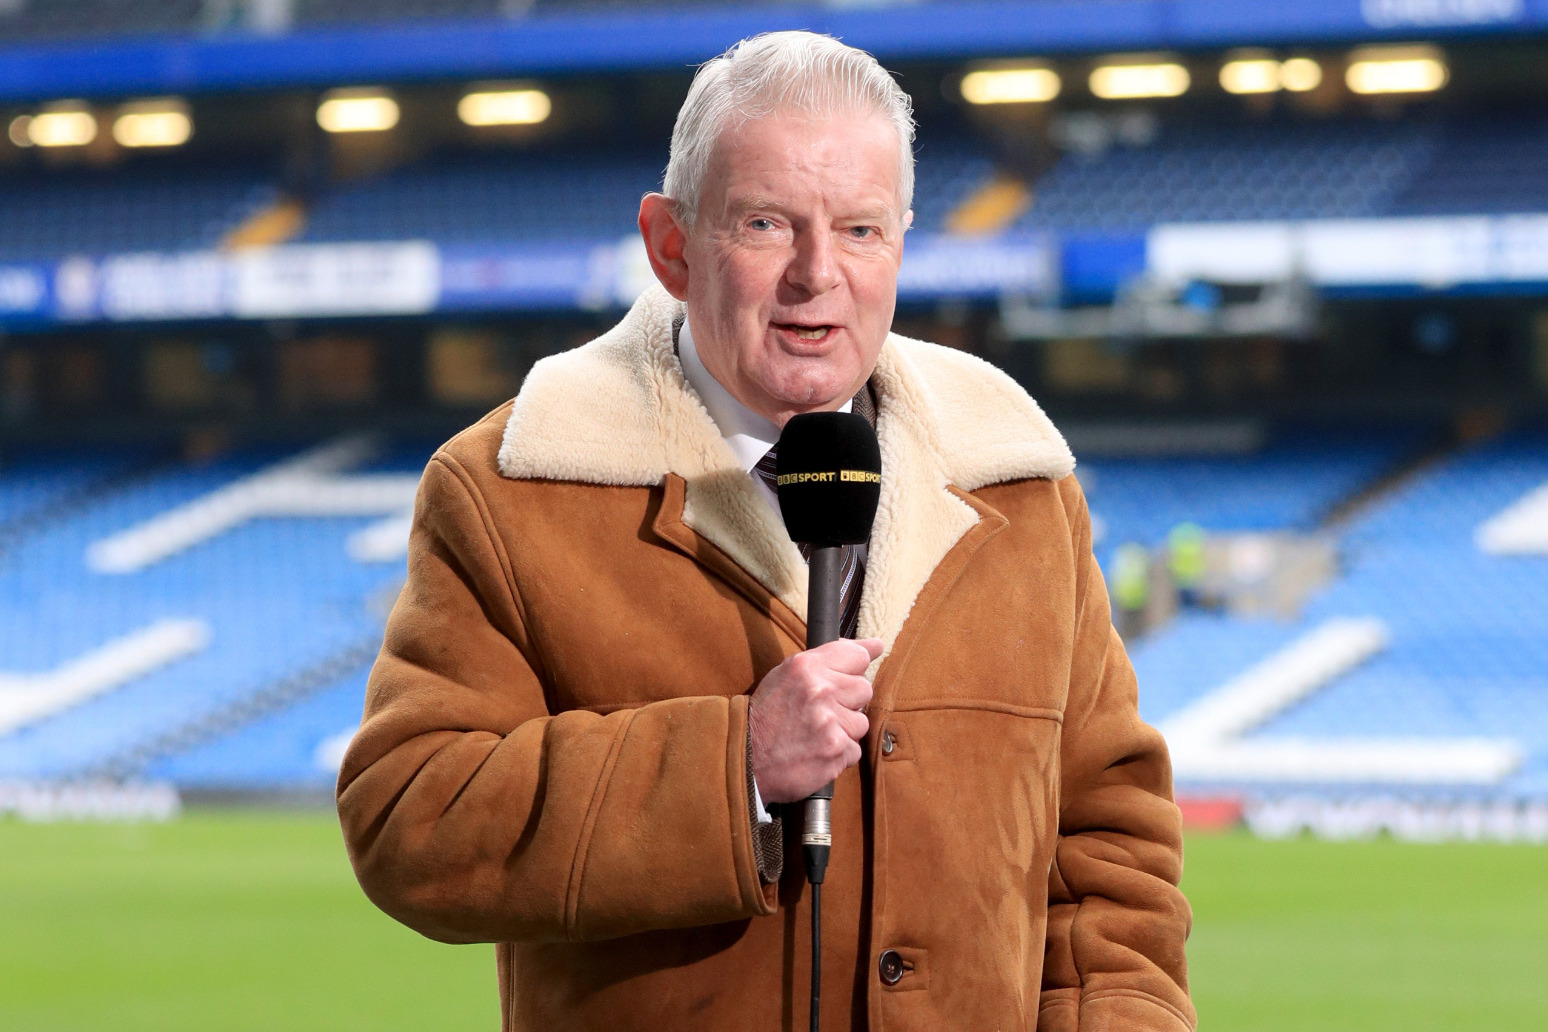 Tributes are being paid to legendary football commentator, John Motson, who has died at the age of 77 